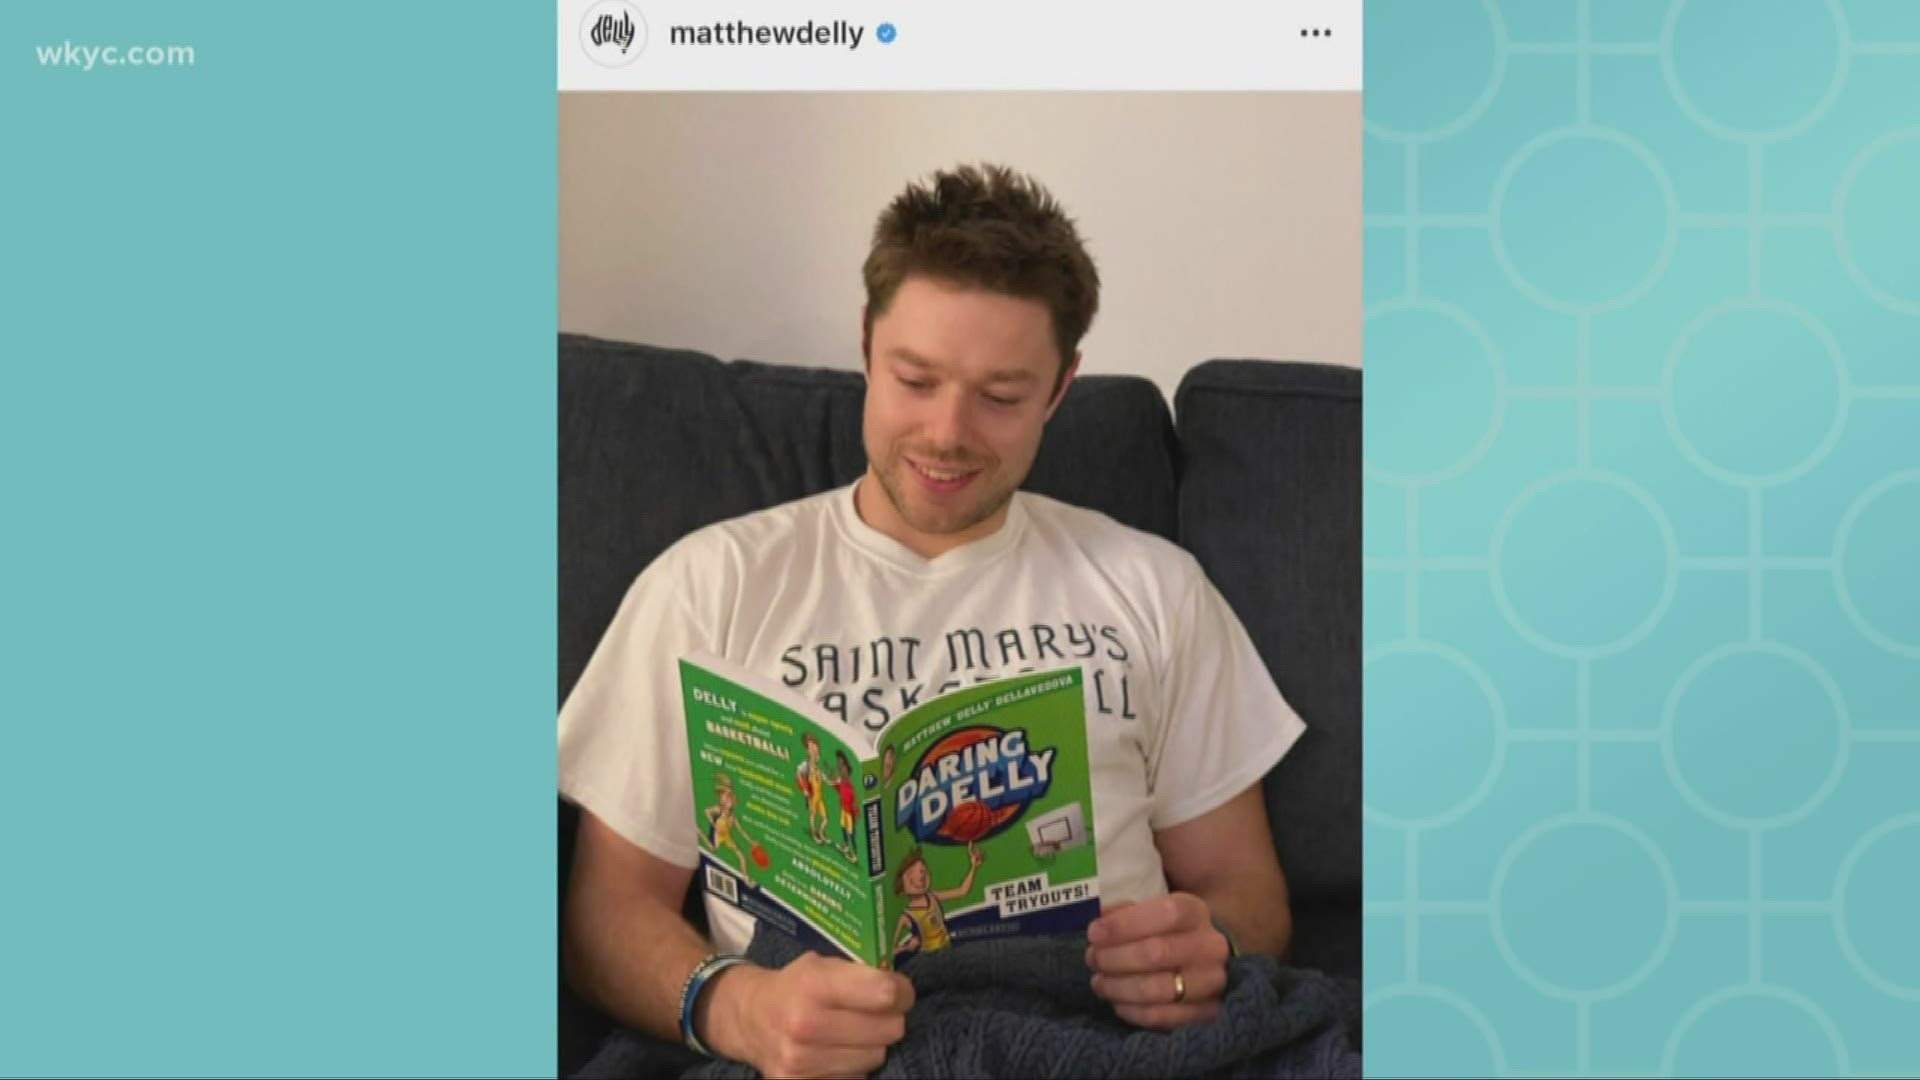 In Cleveland, two out of three low income kids don't own a single book. For Cavaliers guard Matthew Dellavedova, that number is far too high.